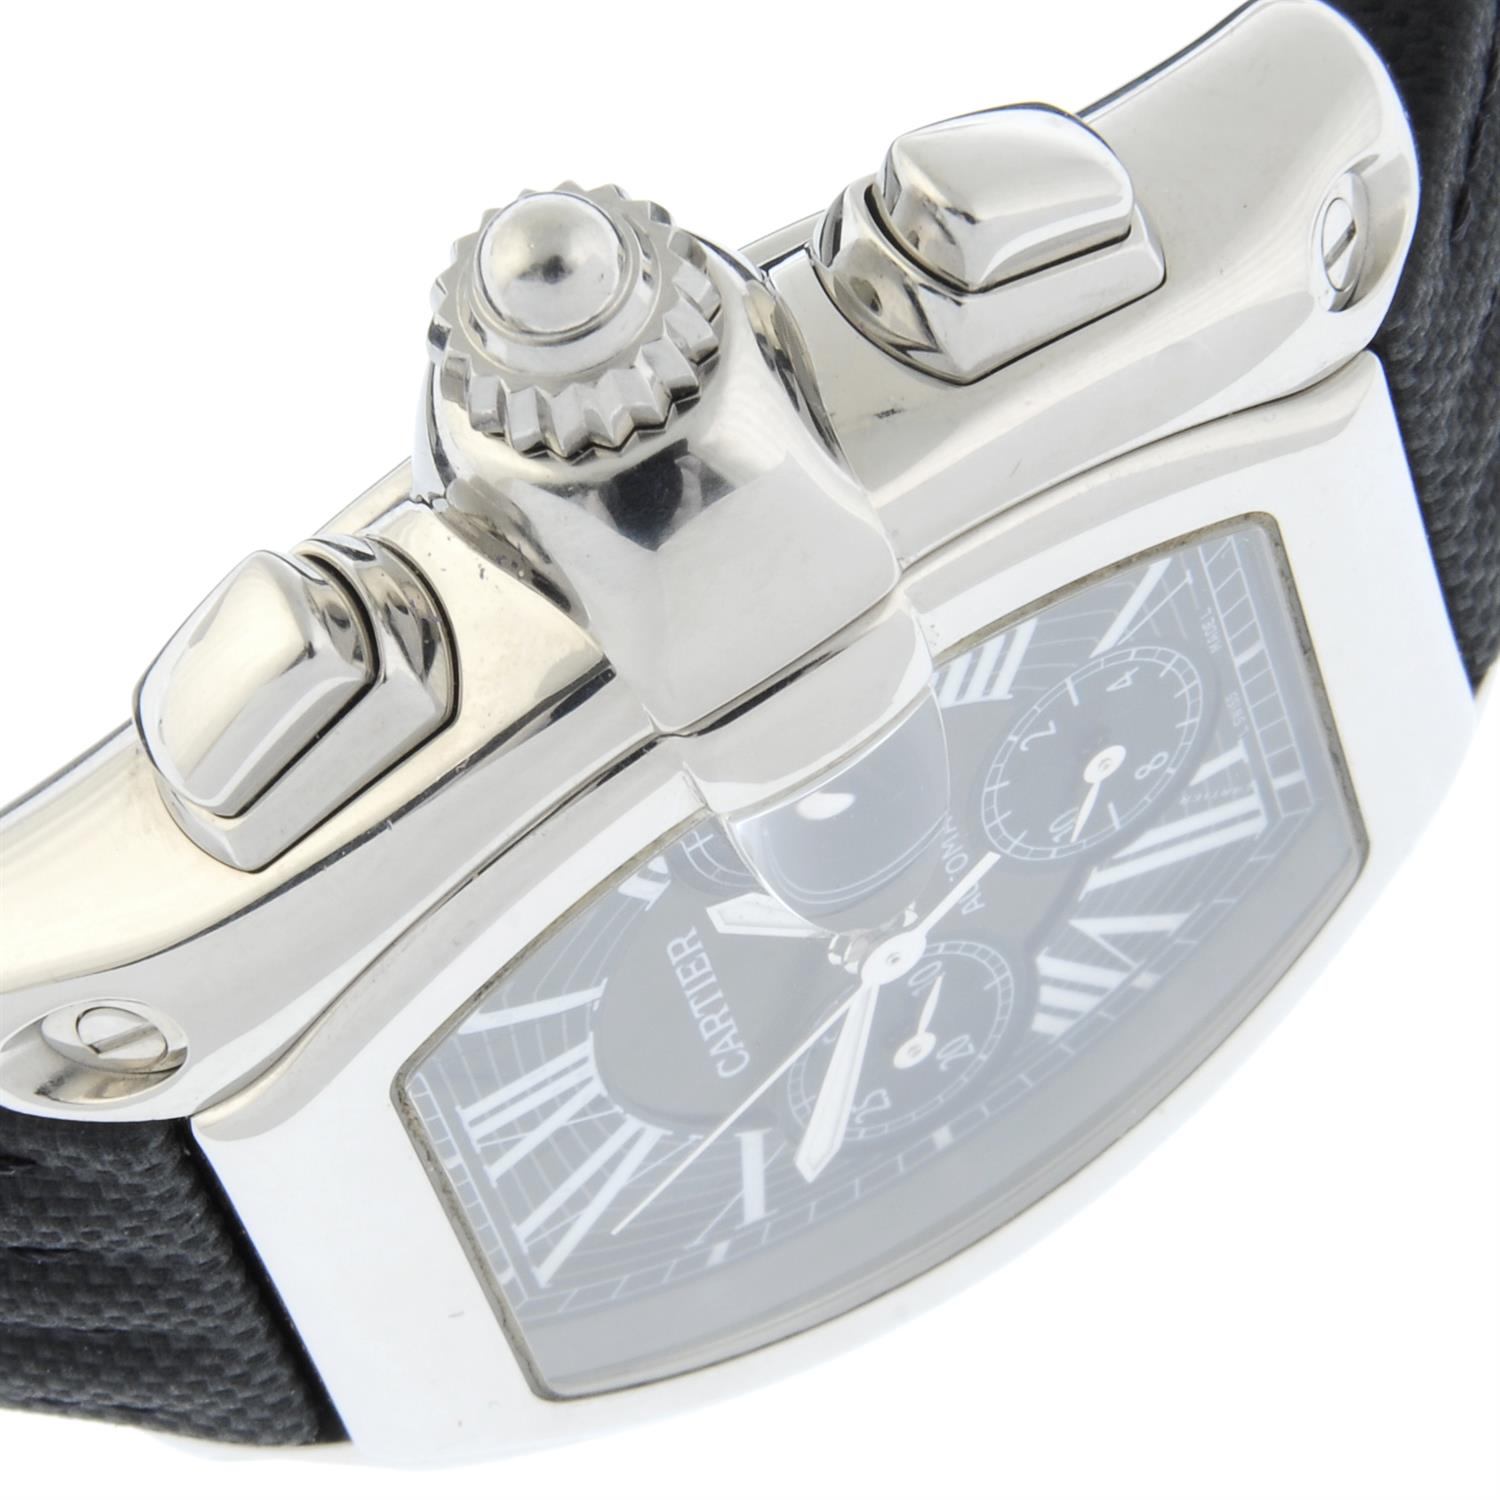 Cartier - a Roadster chronograph watch, 40mm. - Image 3 of 7